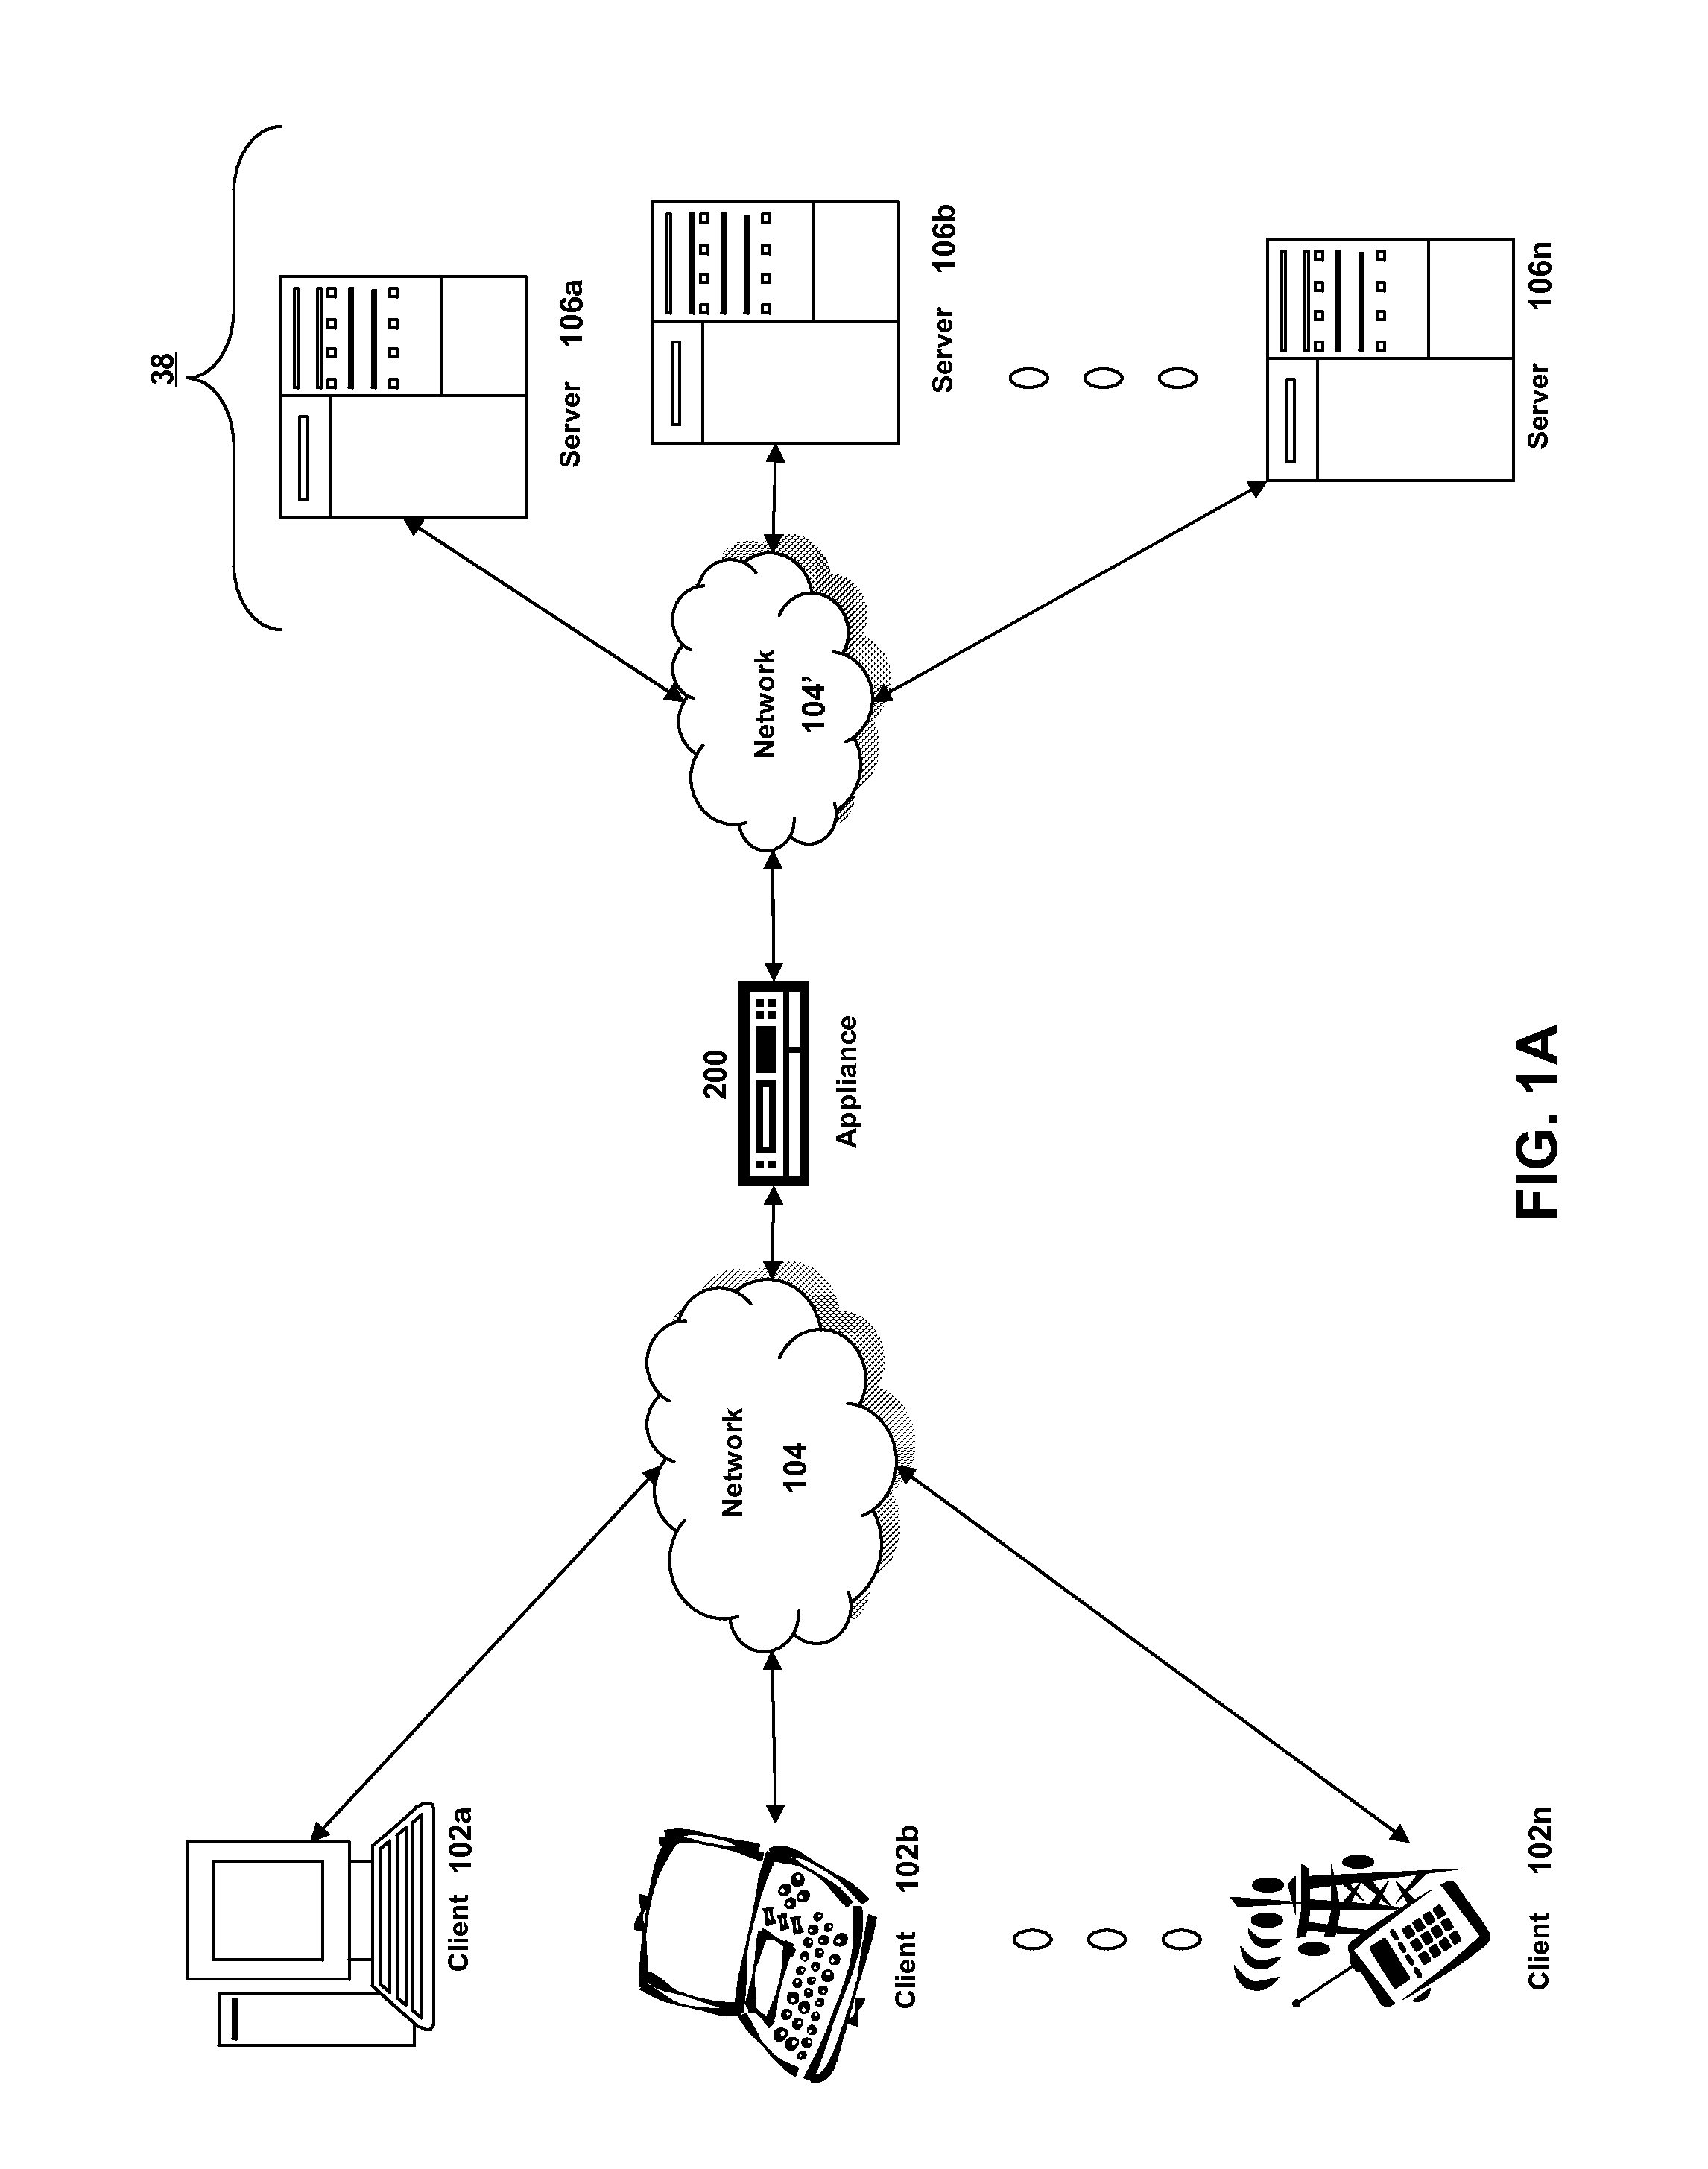 Systems and methods for http-body DOS attack prevention with adaptive timeout